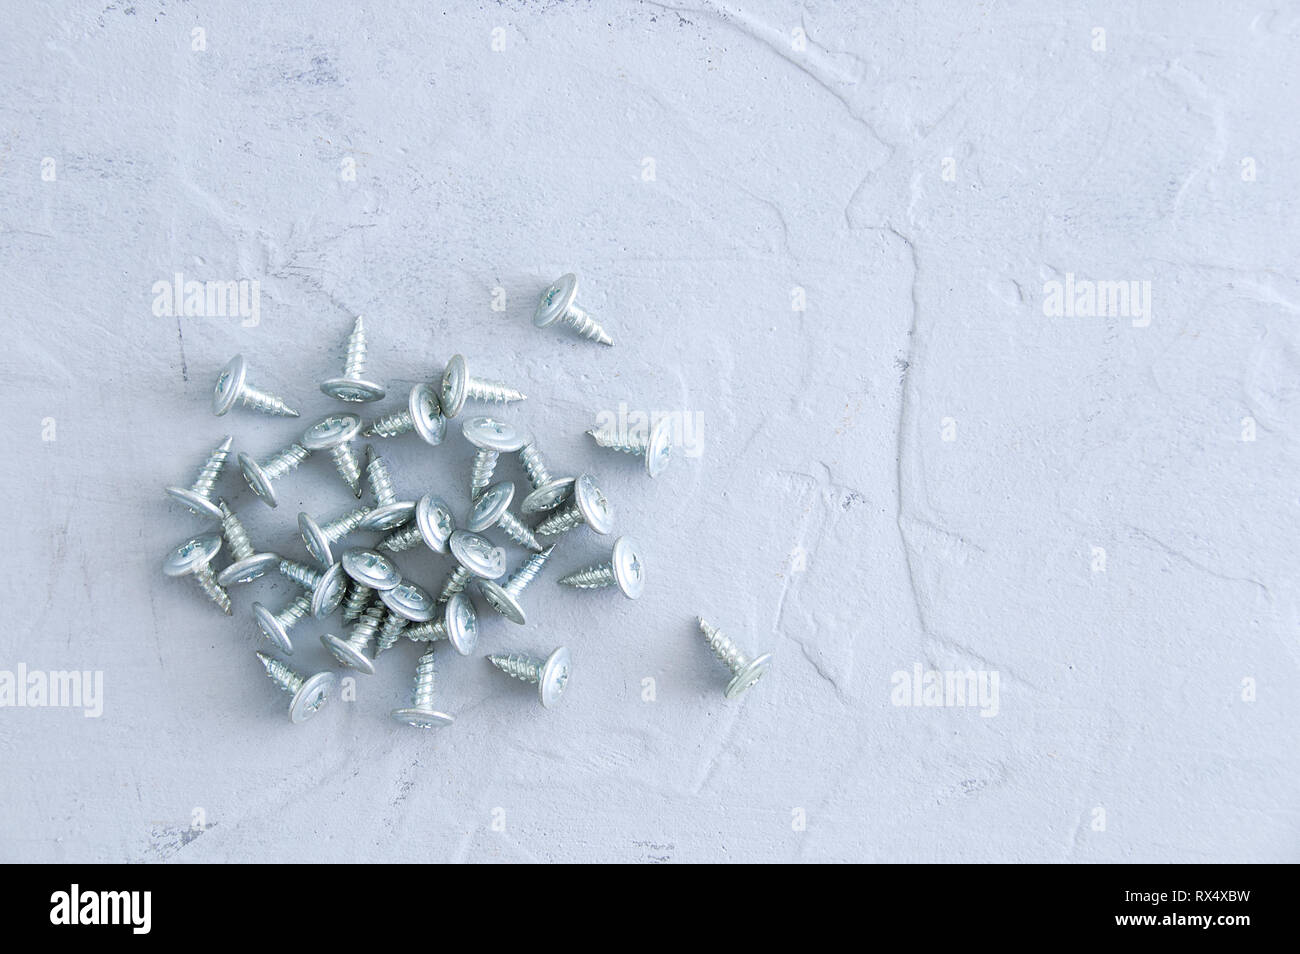 Silvery metal screws for plasterboard walls. On a gray concrete background. Close-up. Stock Photo